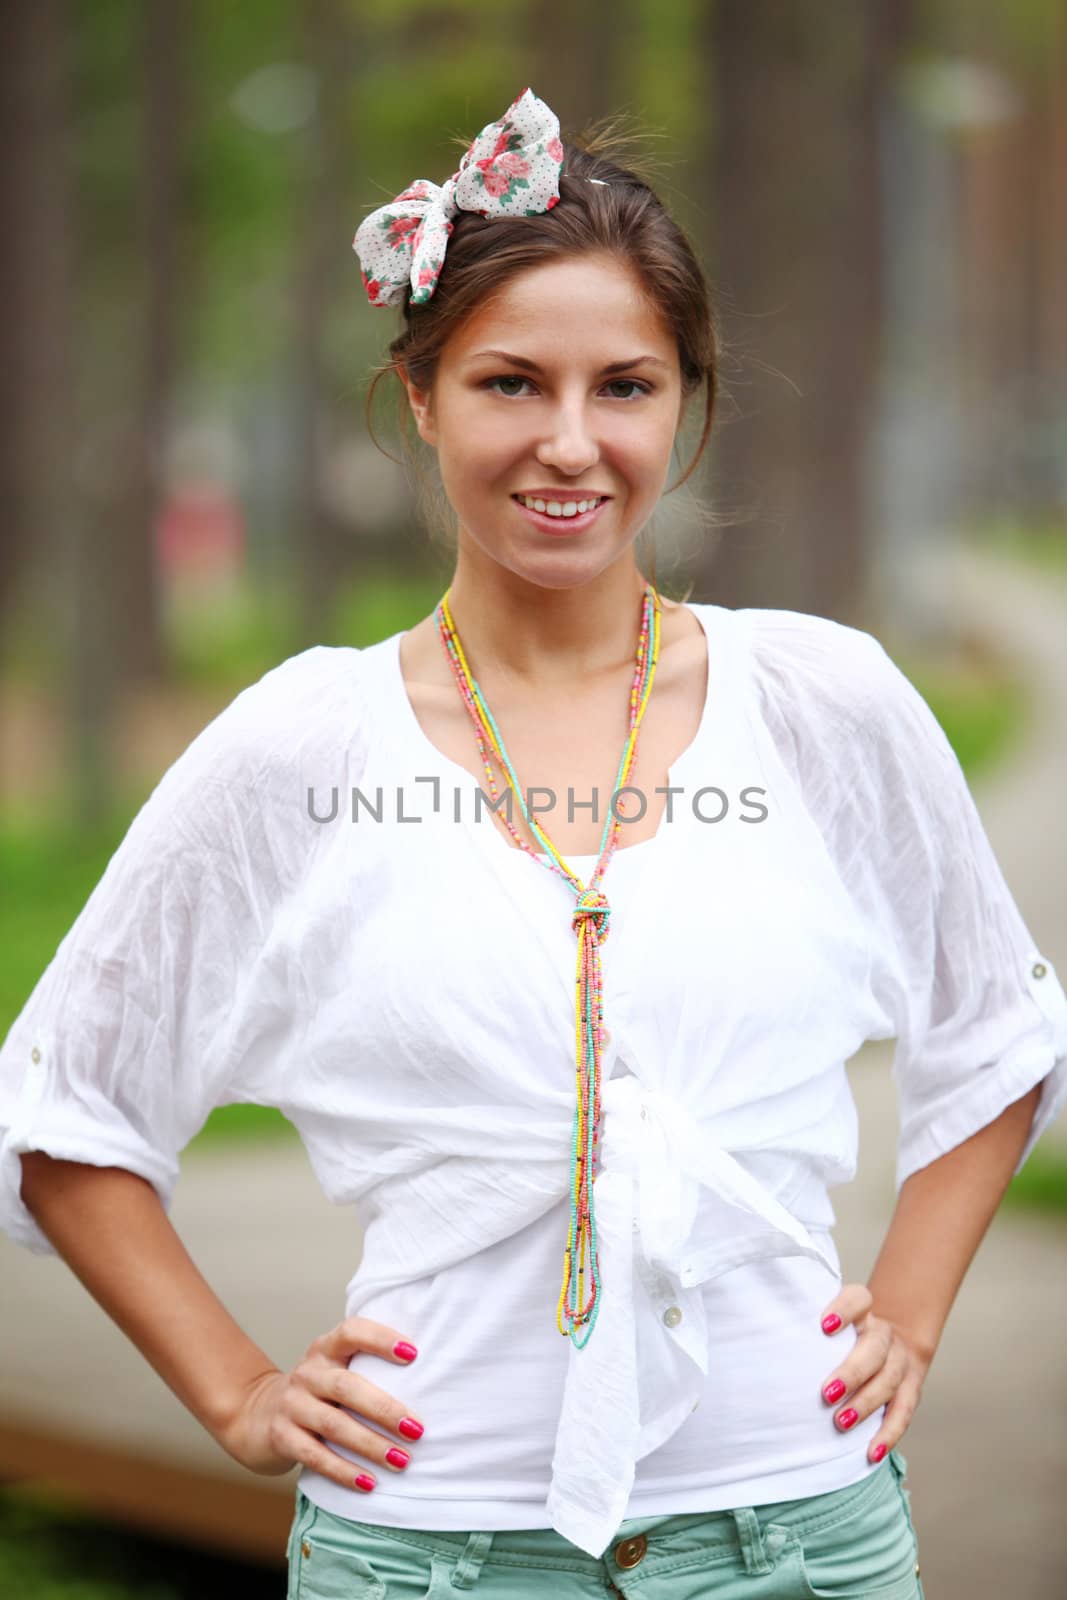 Portrait of young smiling woman standing in park